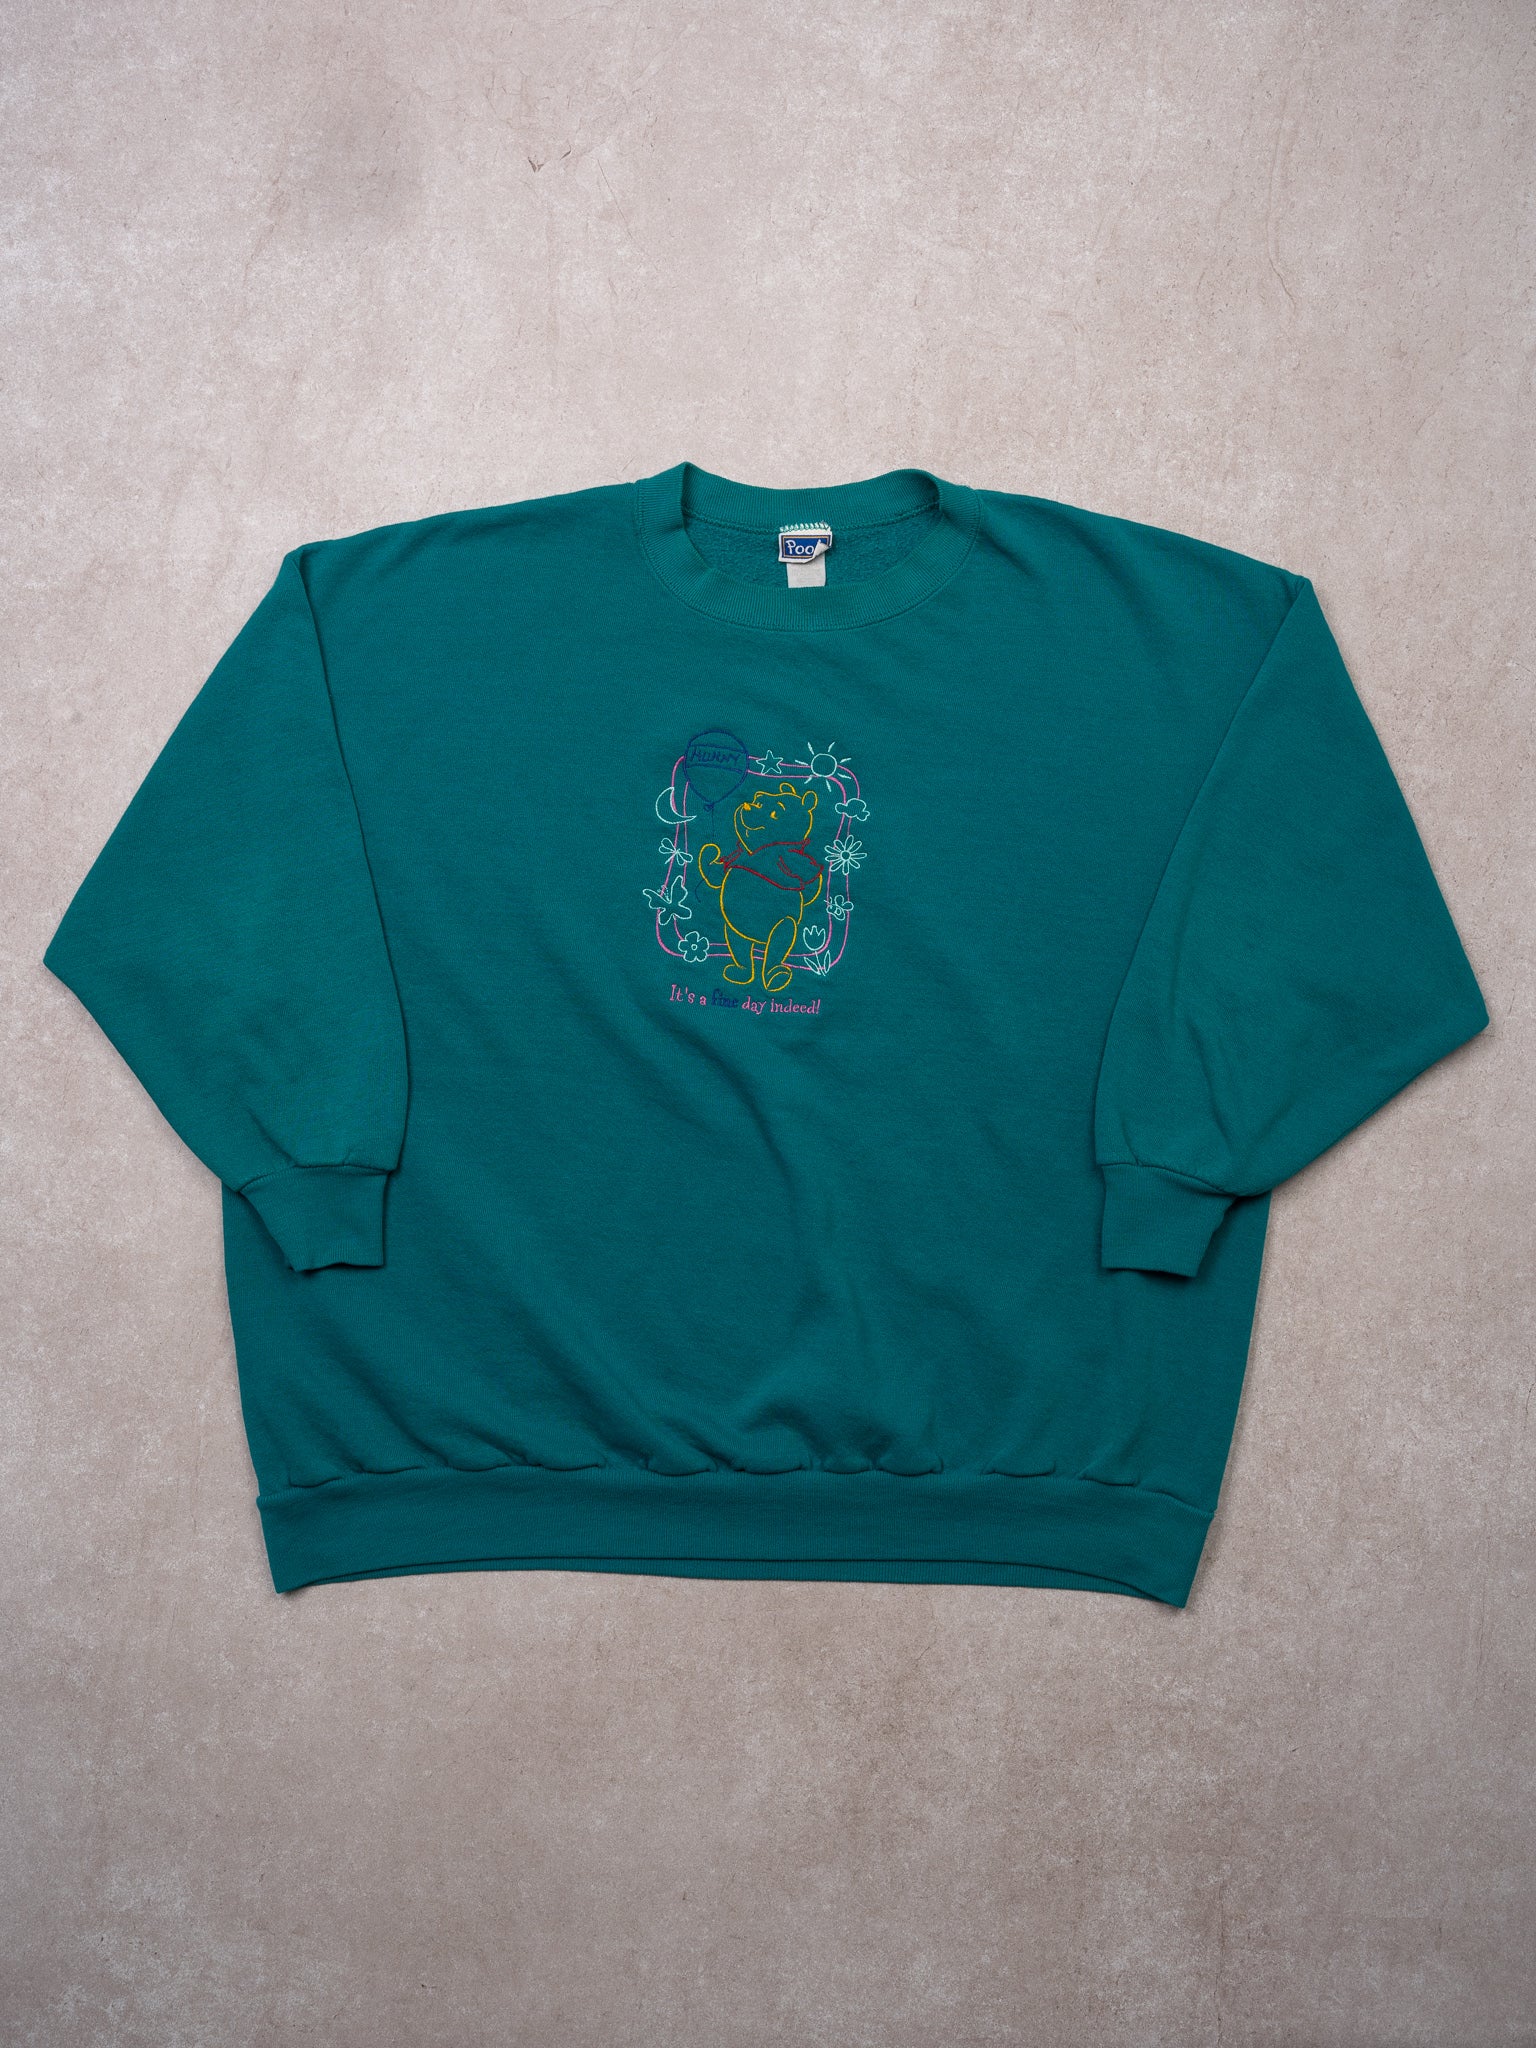 Vintage 90s Teal Winnie The Pooh 'Its A Fine Day Indeed' Crewneck (M/L)